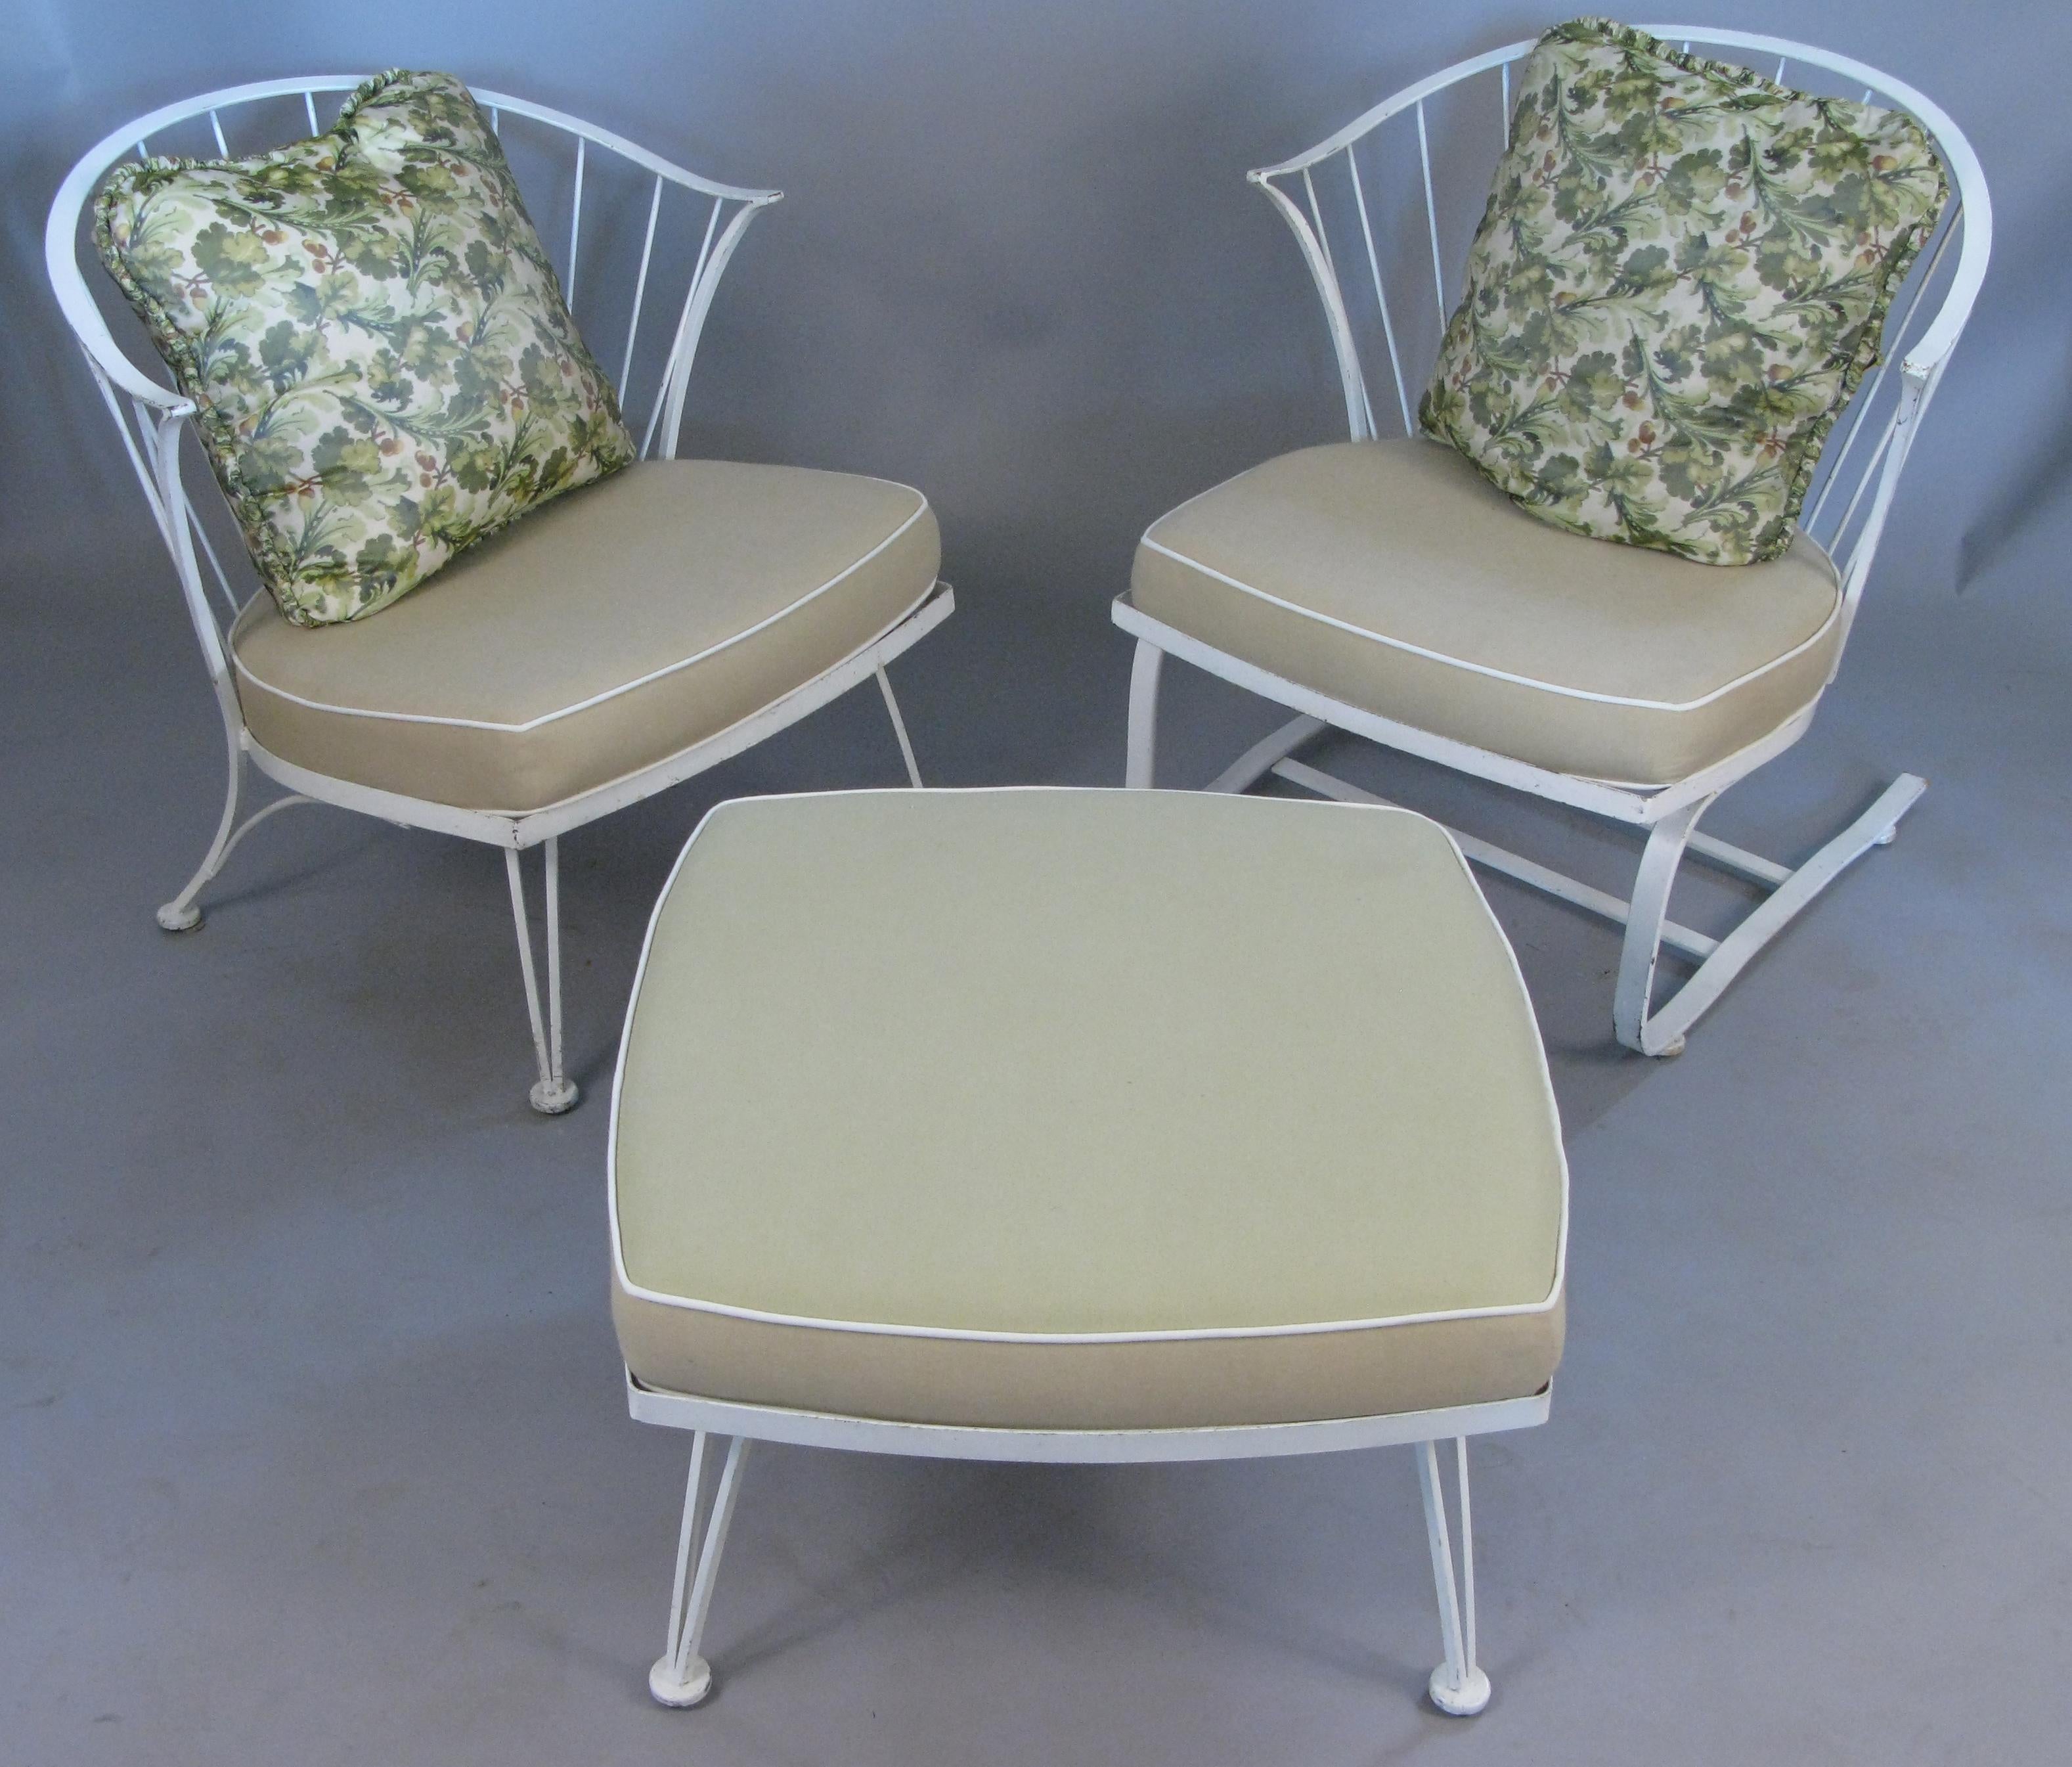 Mid-Century Modern Vintage Pinecrest Lounge Chairs and Ottoman by Woodard